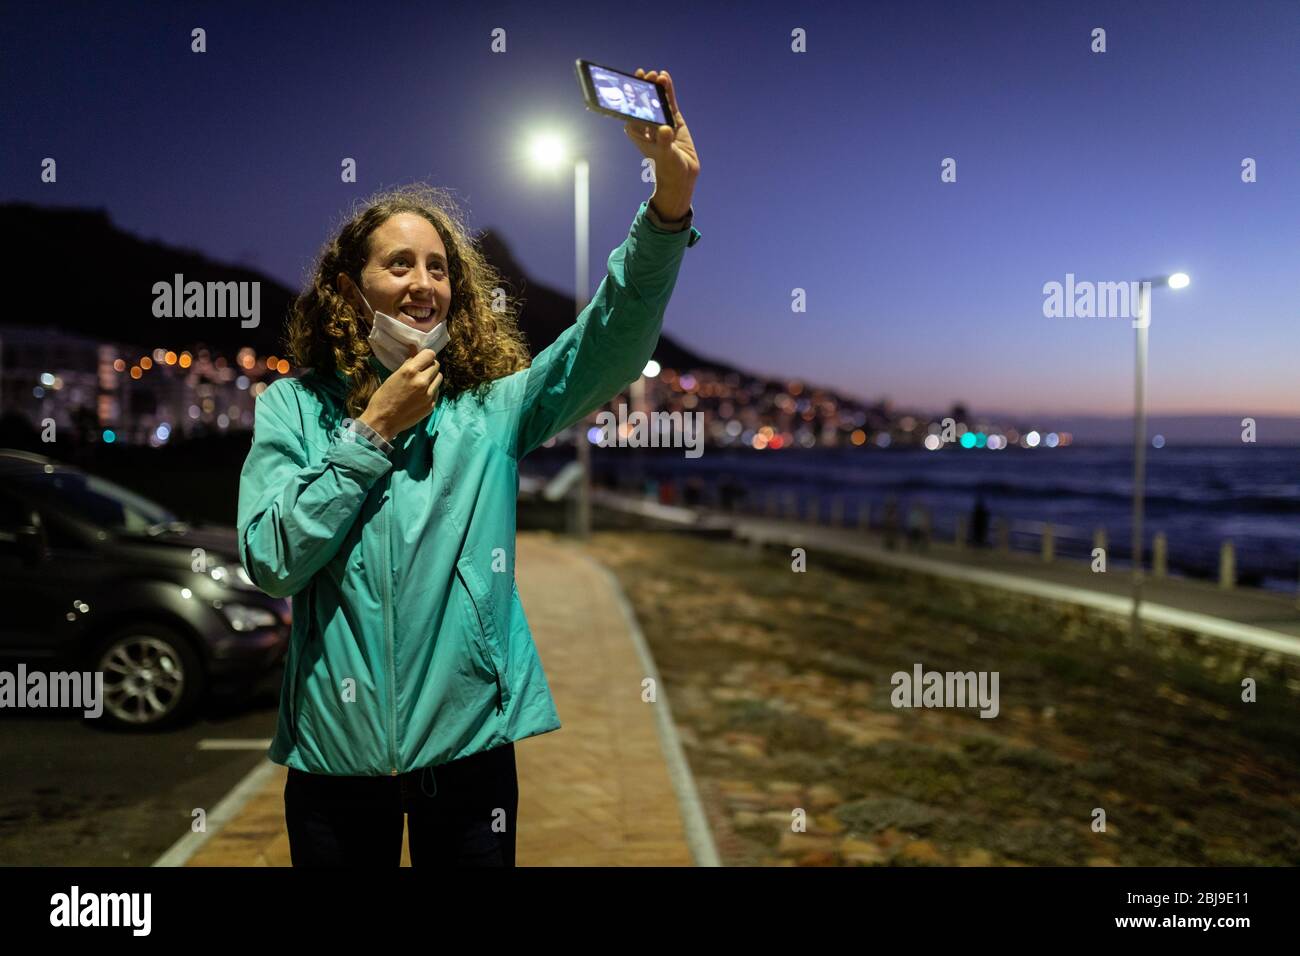 Caucasian woman putting off a protective mask, taking a picture in the streets Stock Photo